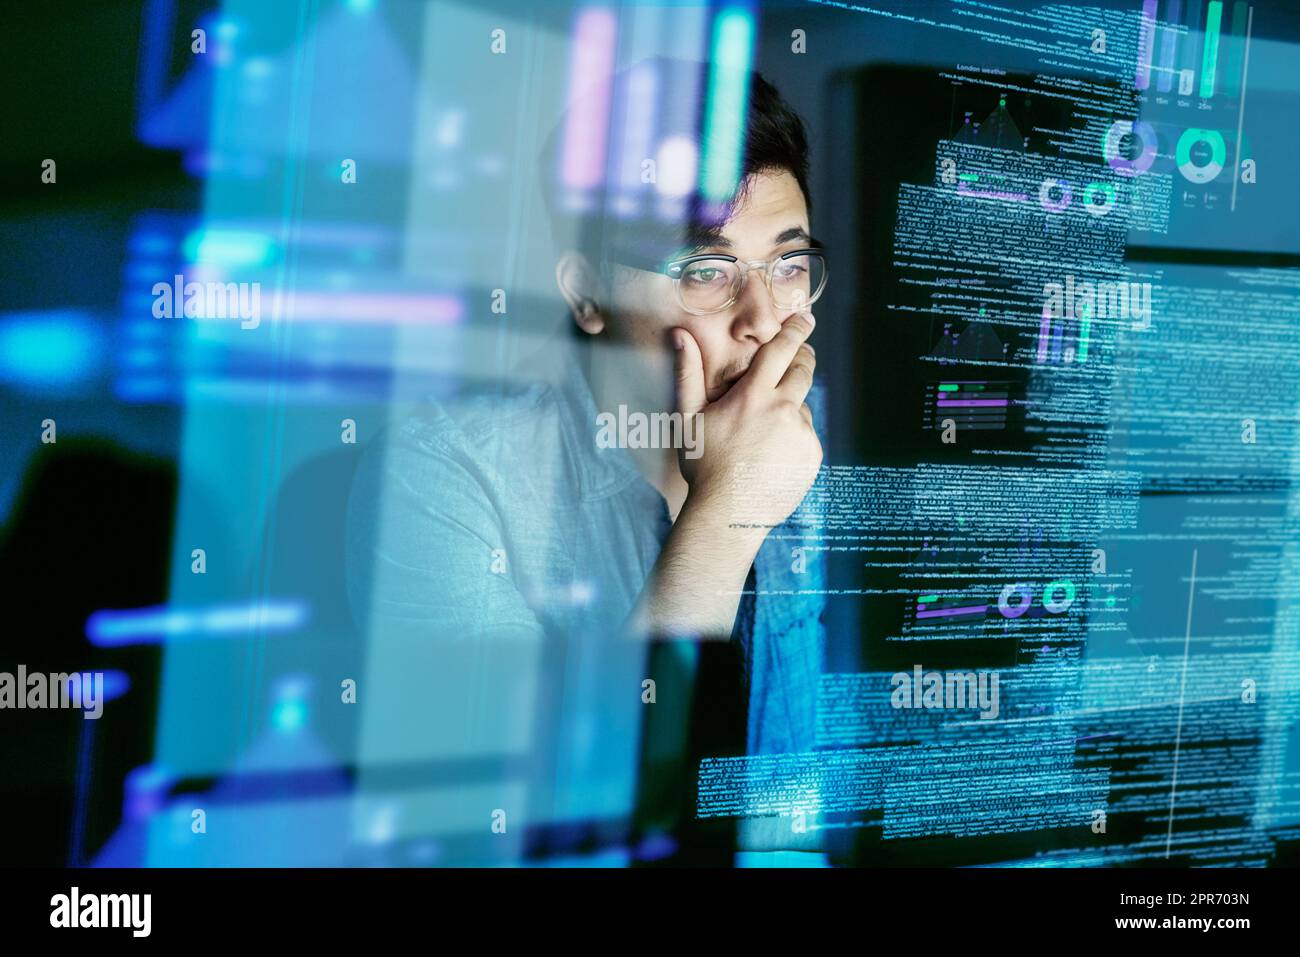 Looking for bugs in the code. Cropped shot of a young computer programmer looking through data. Stock Photo